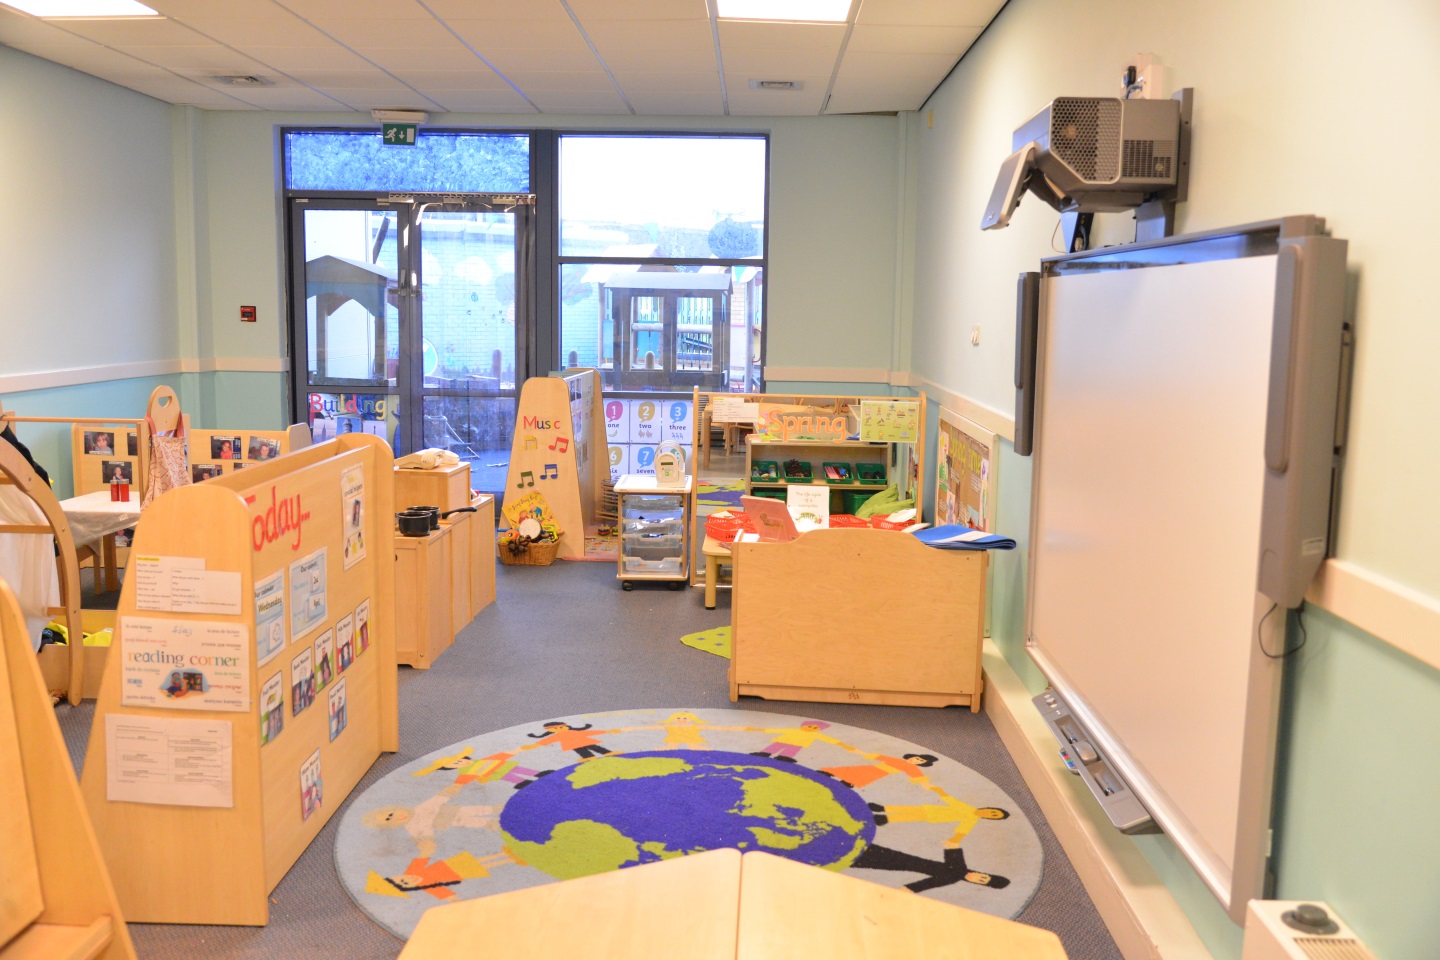 Images Bright Horizons Kirkby Day Nursery and Preschool